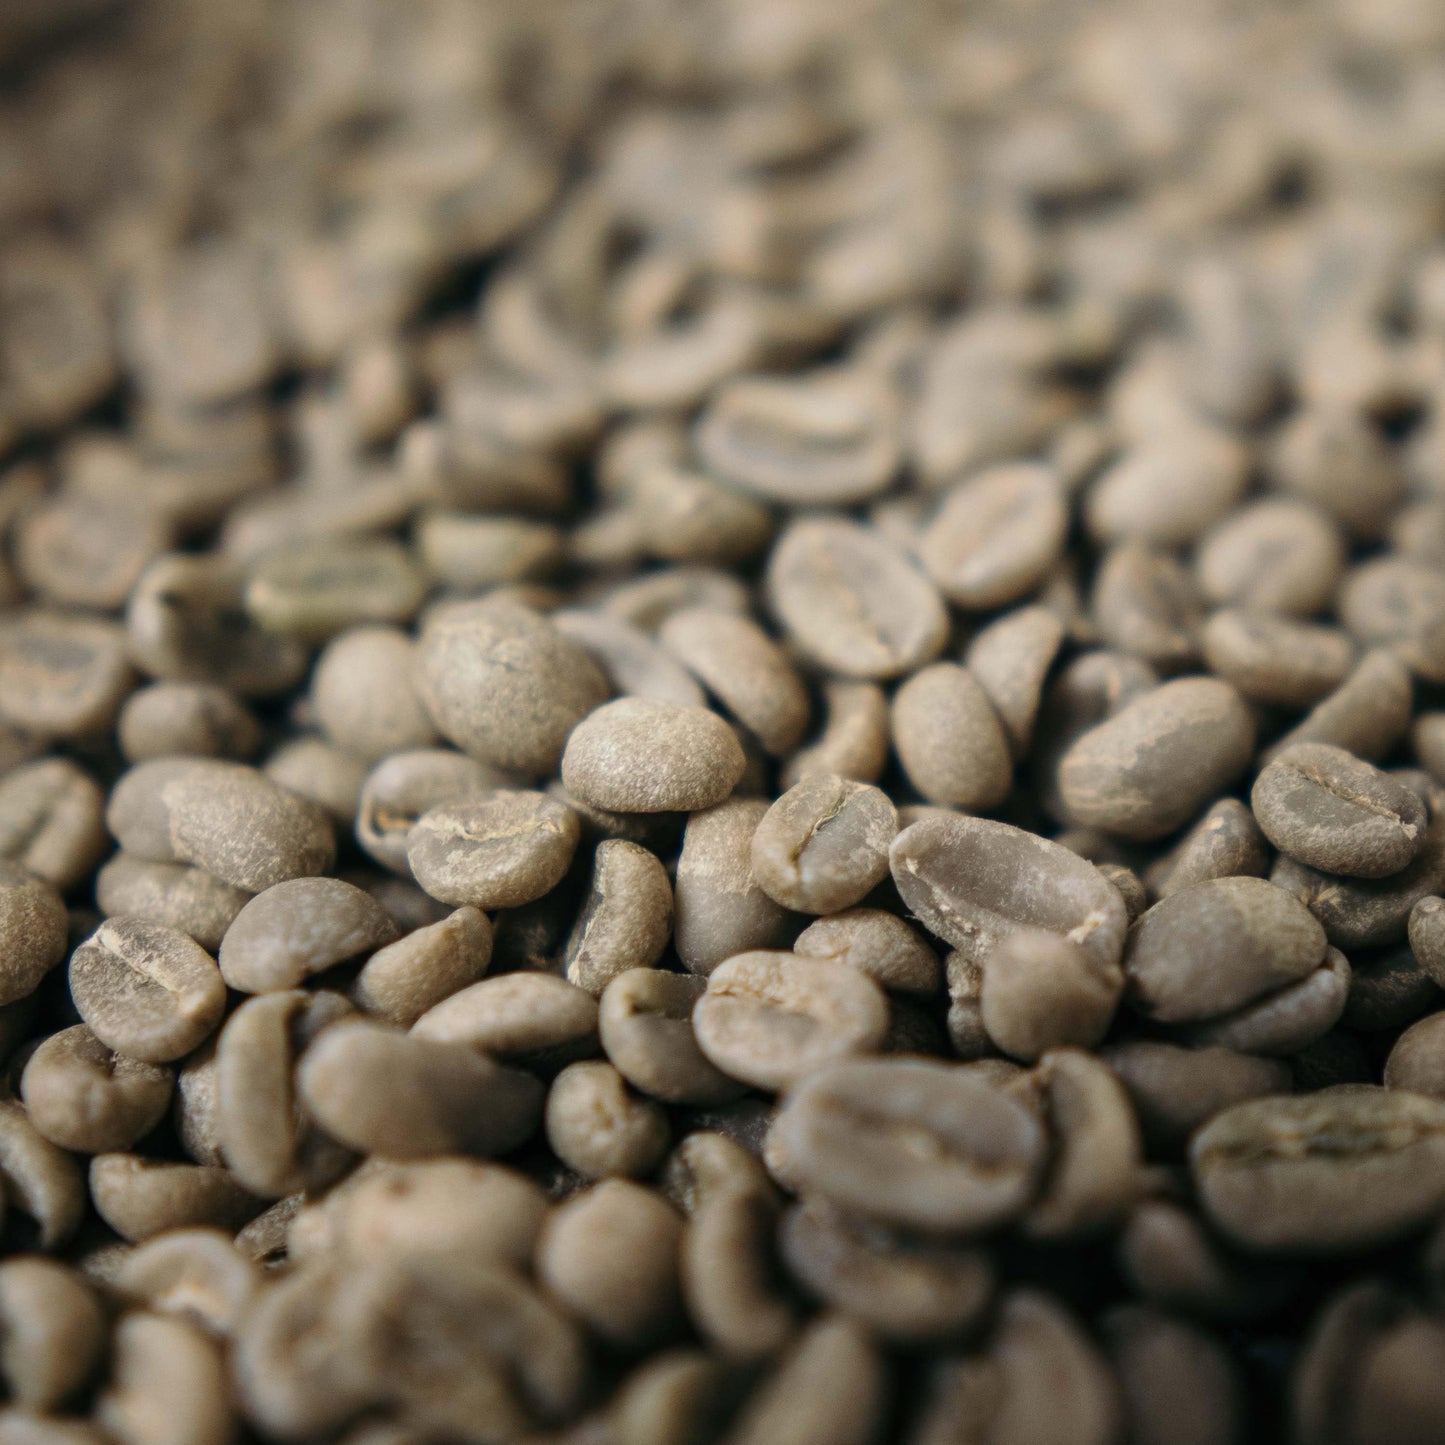 Colombia Narino Excelso - Raw, green coffee beans